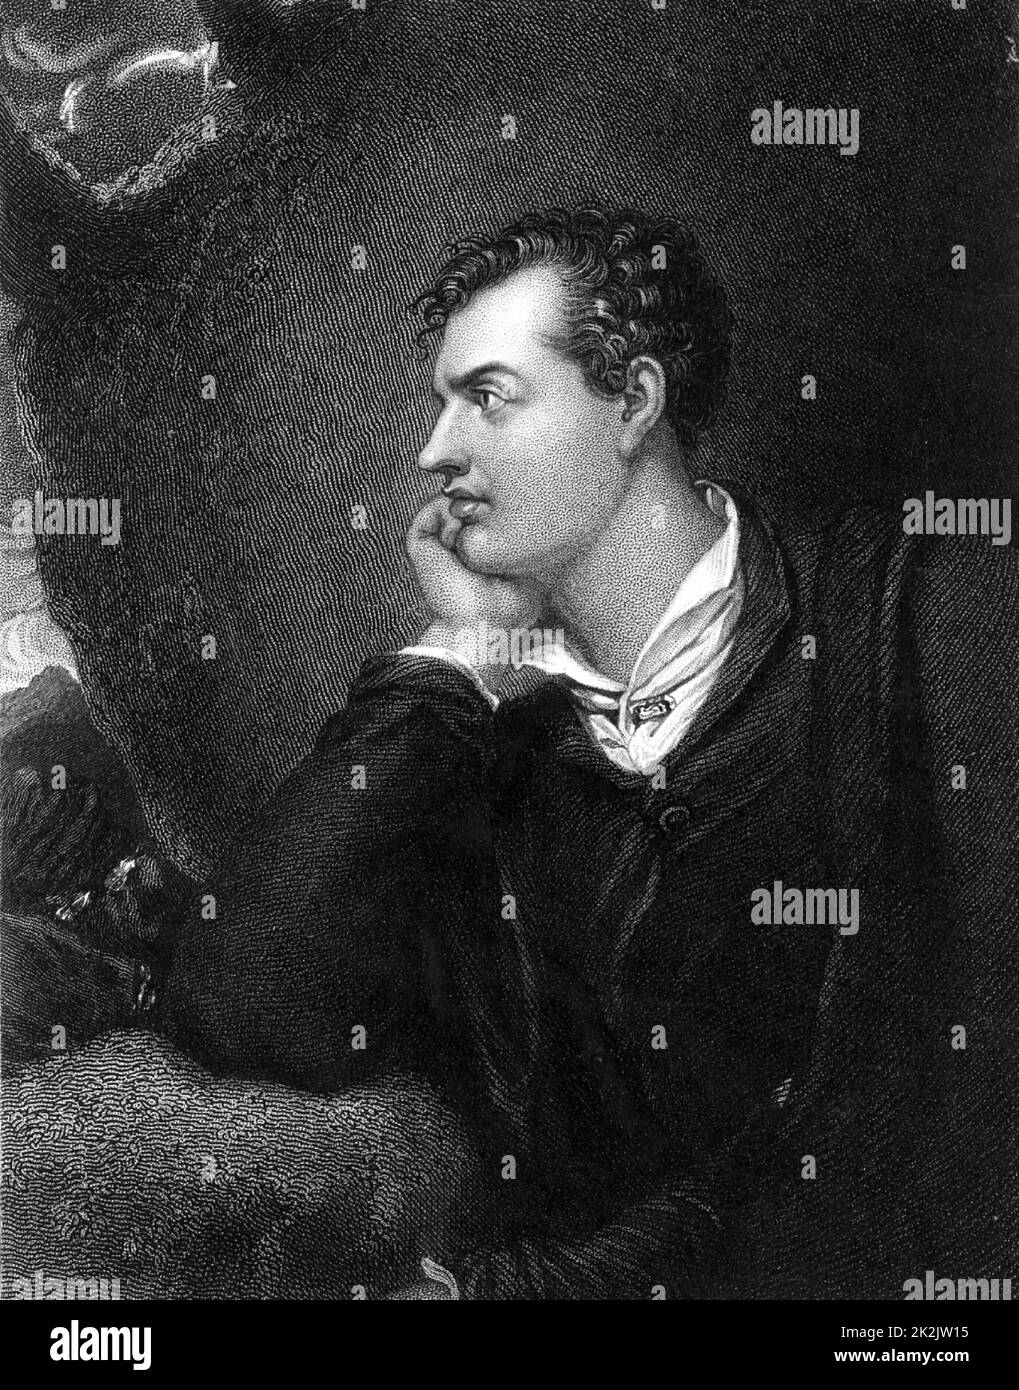 George Gordon, Lord Byron (1788-1824) English Romantic poet of Scottish descent. Engraving after the portrait by Richard Westall. Stock Photo